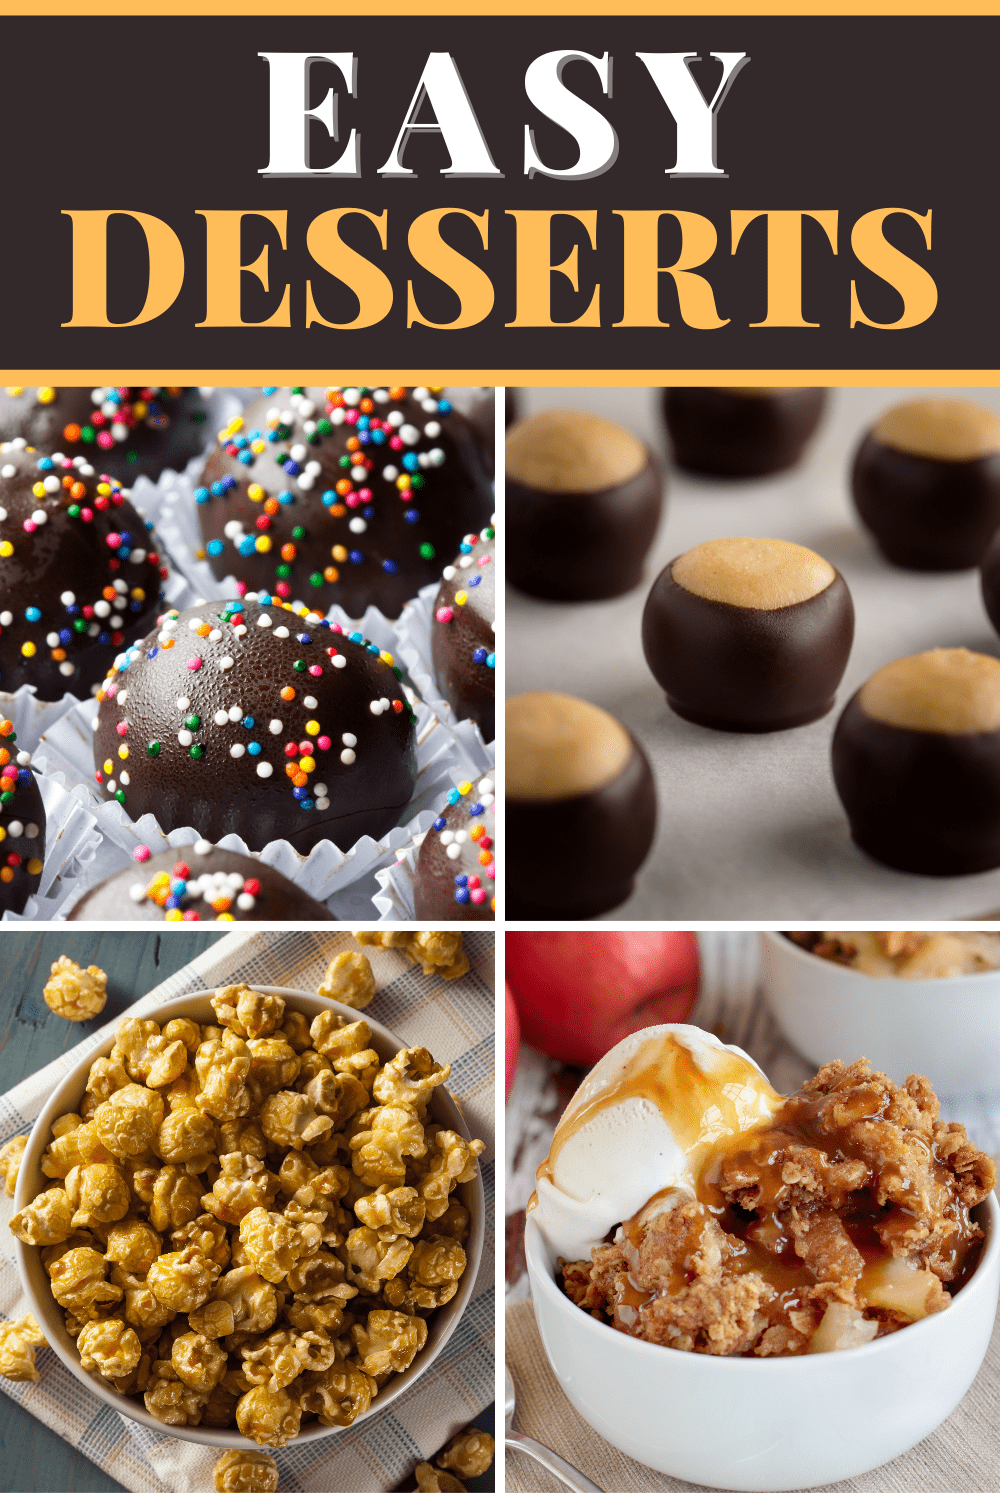 50 Easy Desserts To Make at Home - Insanely Good